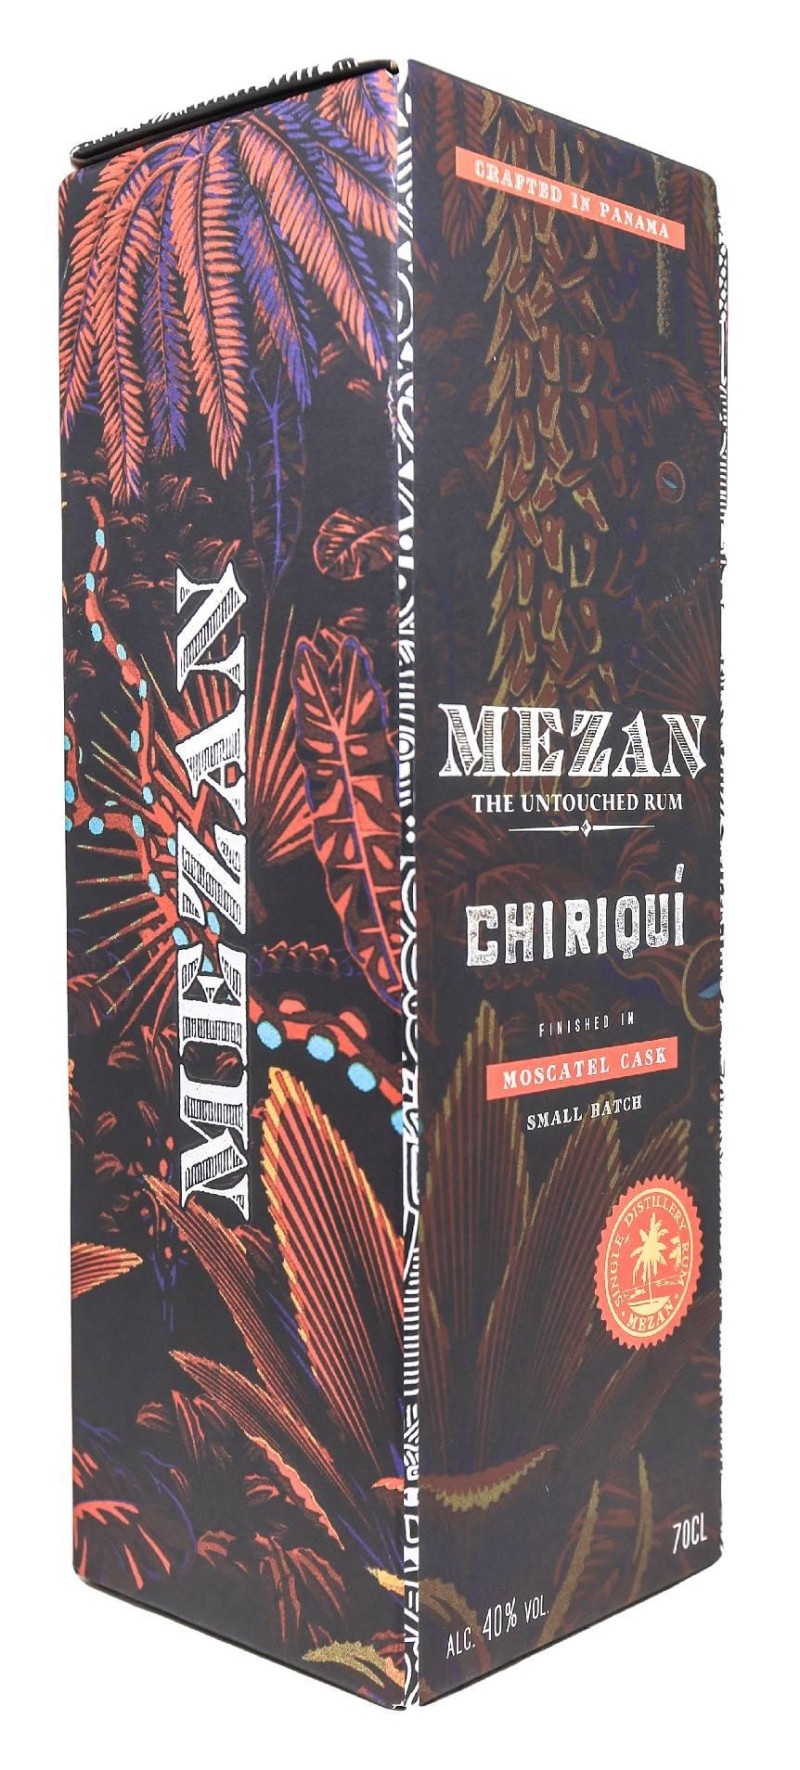 40% Millésimes tradition - Rum - great - - des vintages of (RUM)-MEZAN wines Rare English Clos and Chiriqui